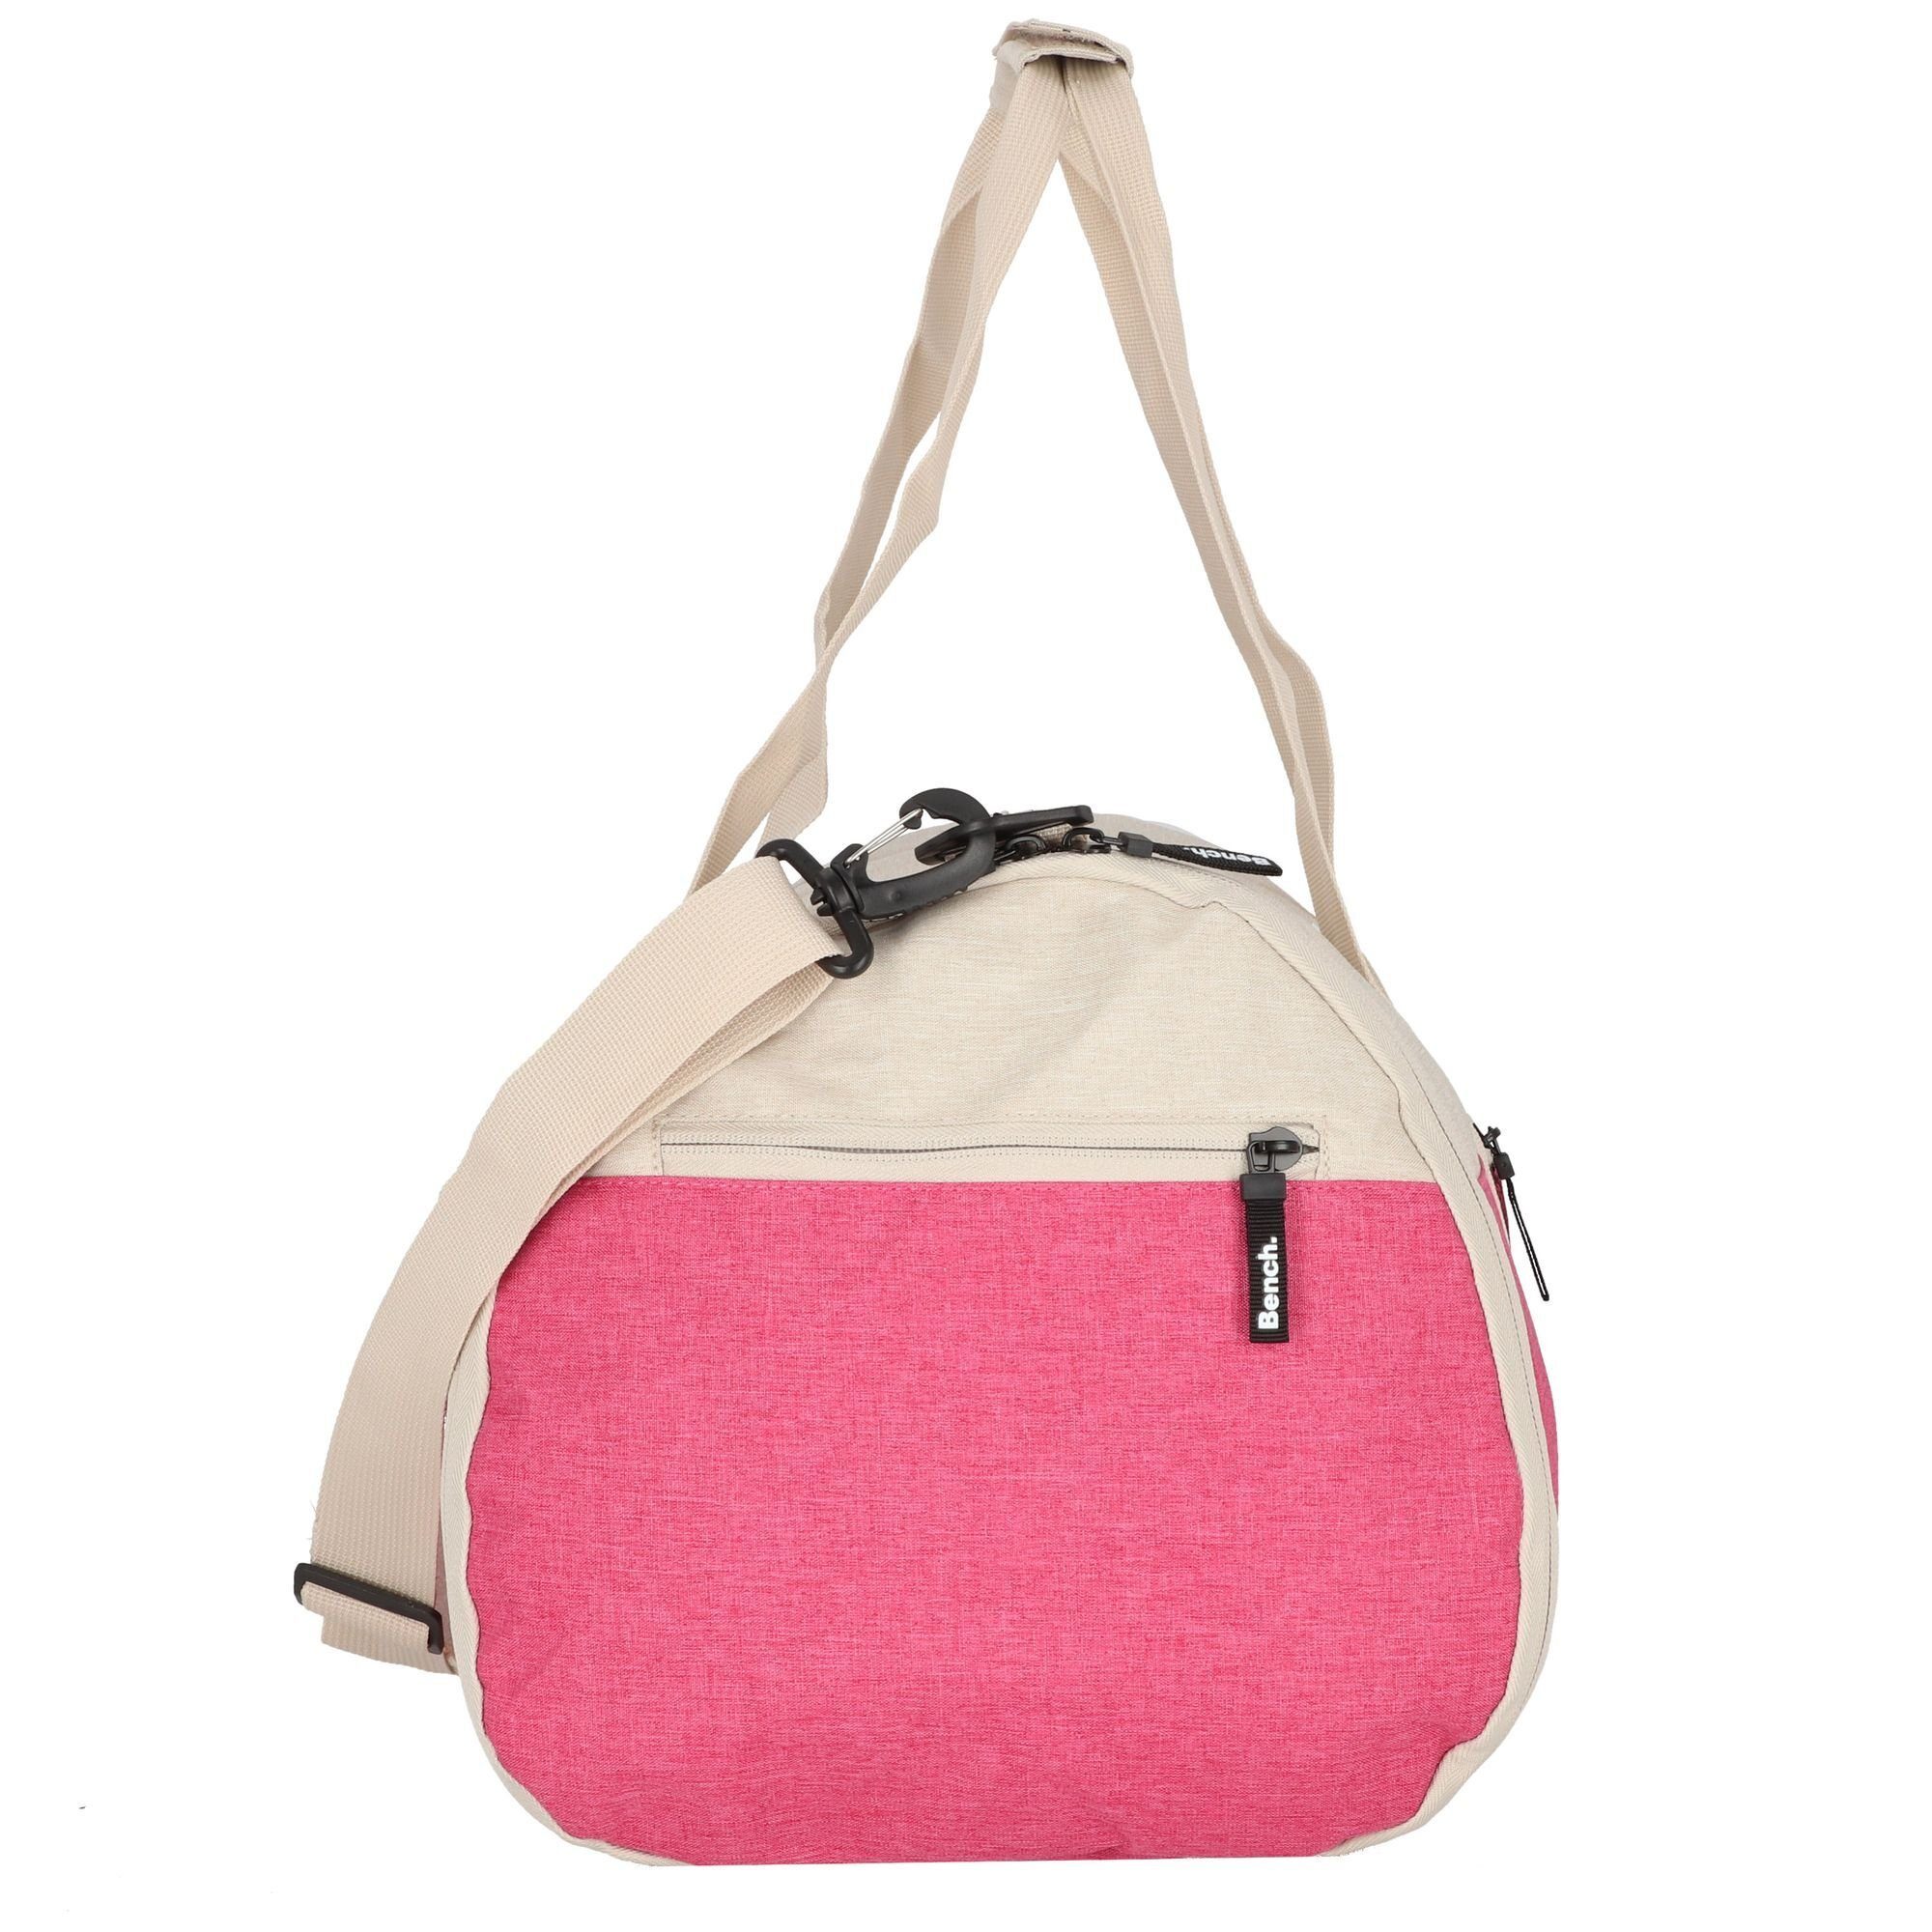 Weekender pink-sand Classic, Bench. Polyester